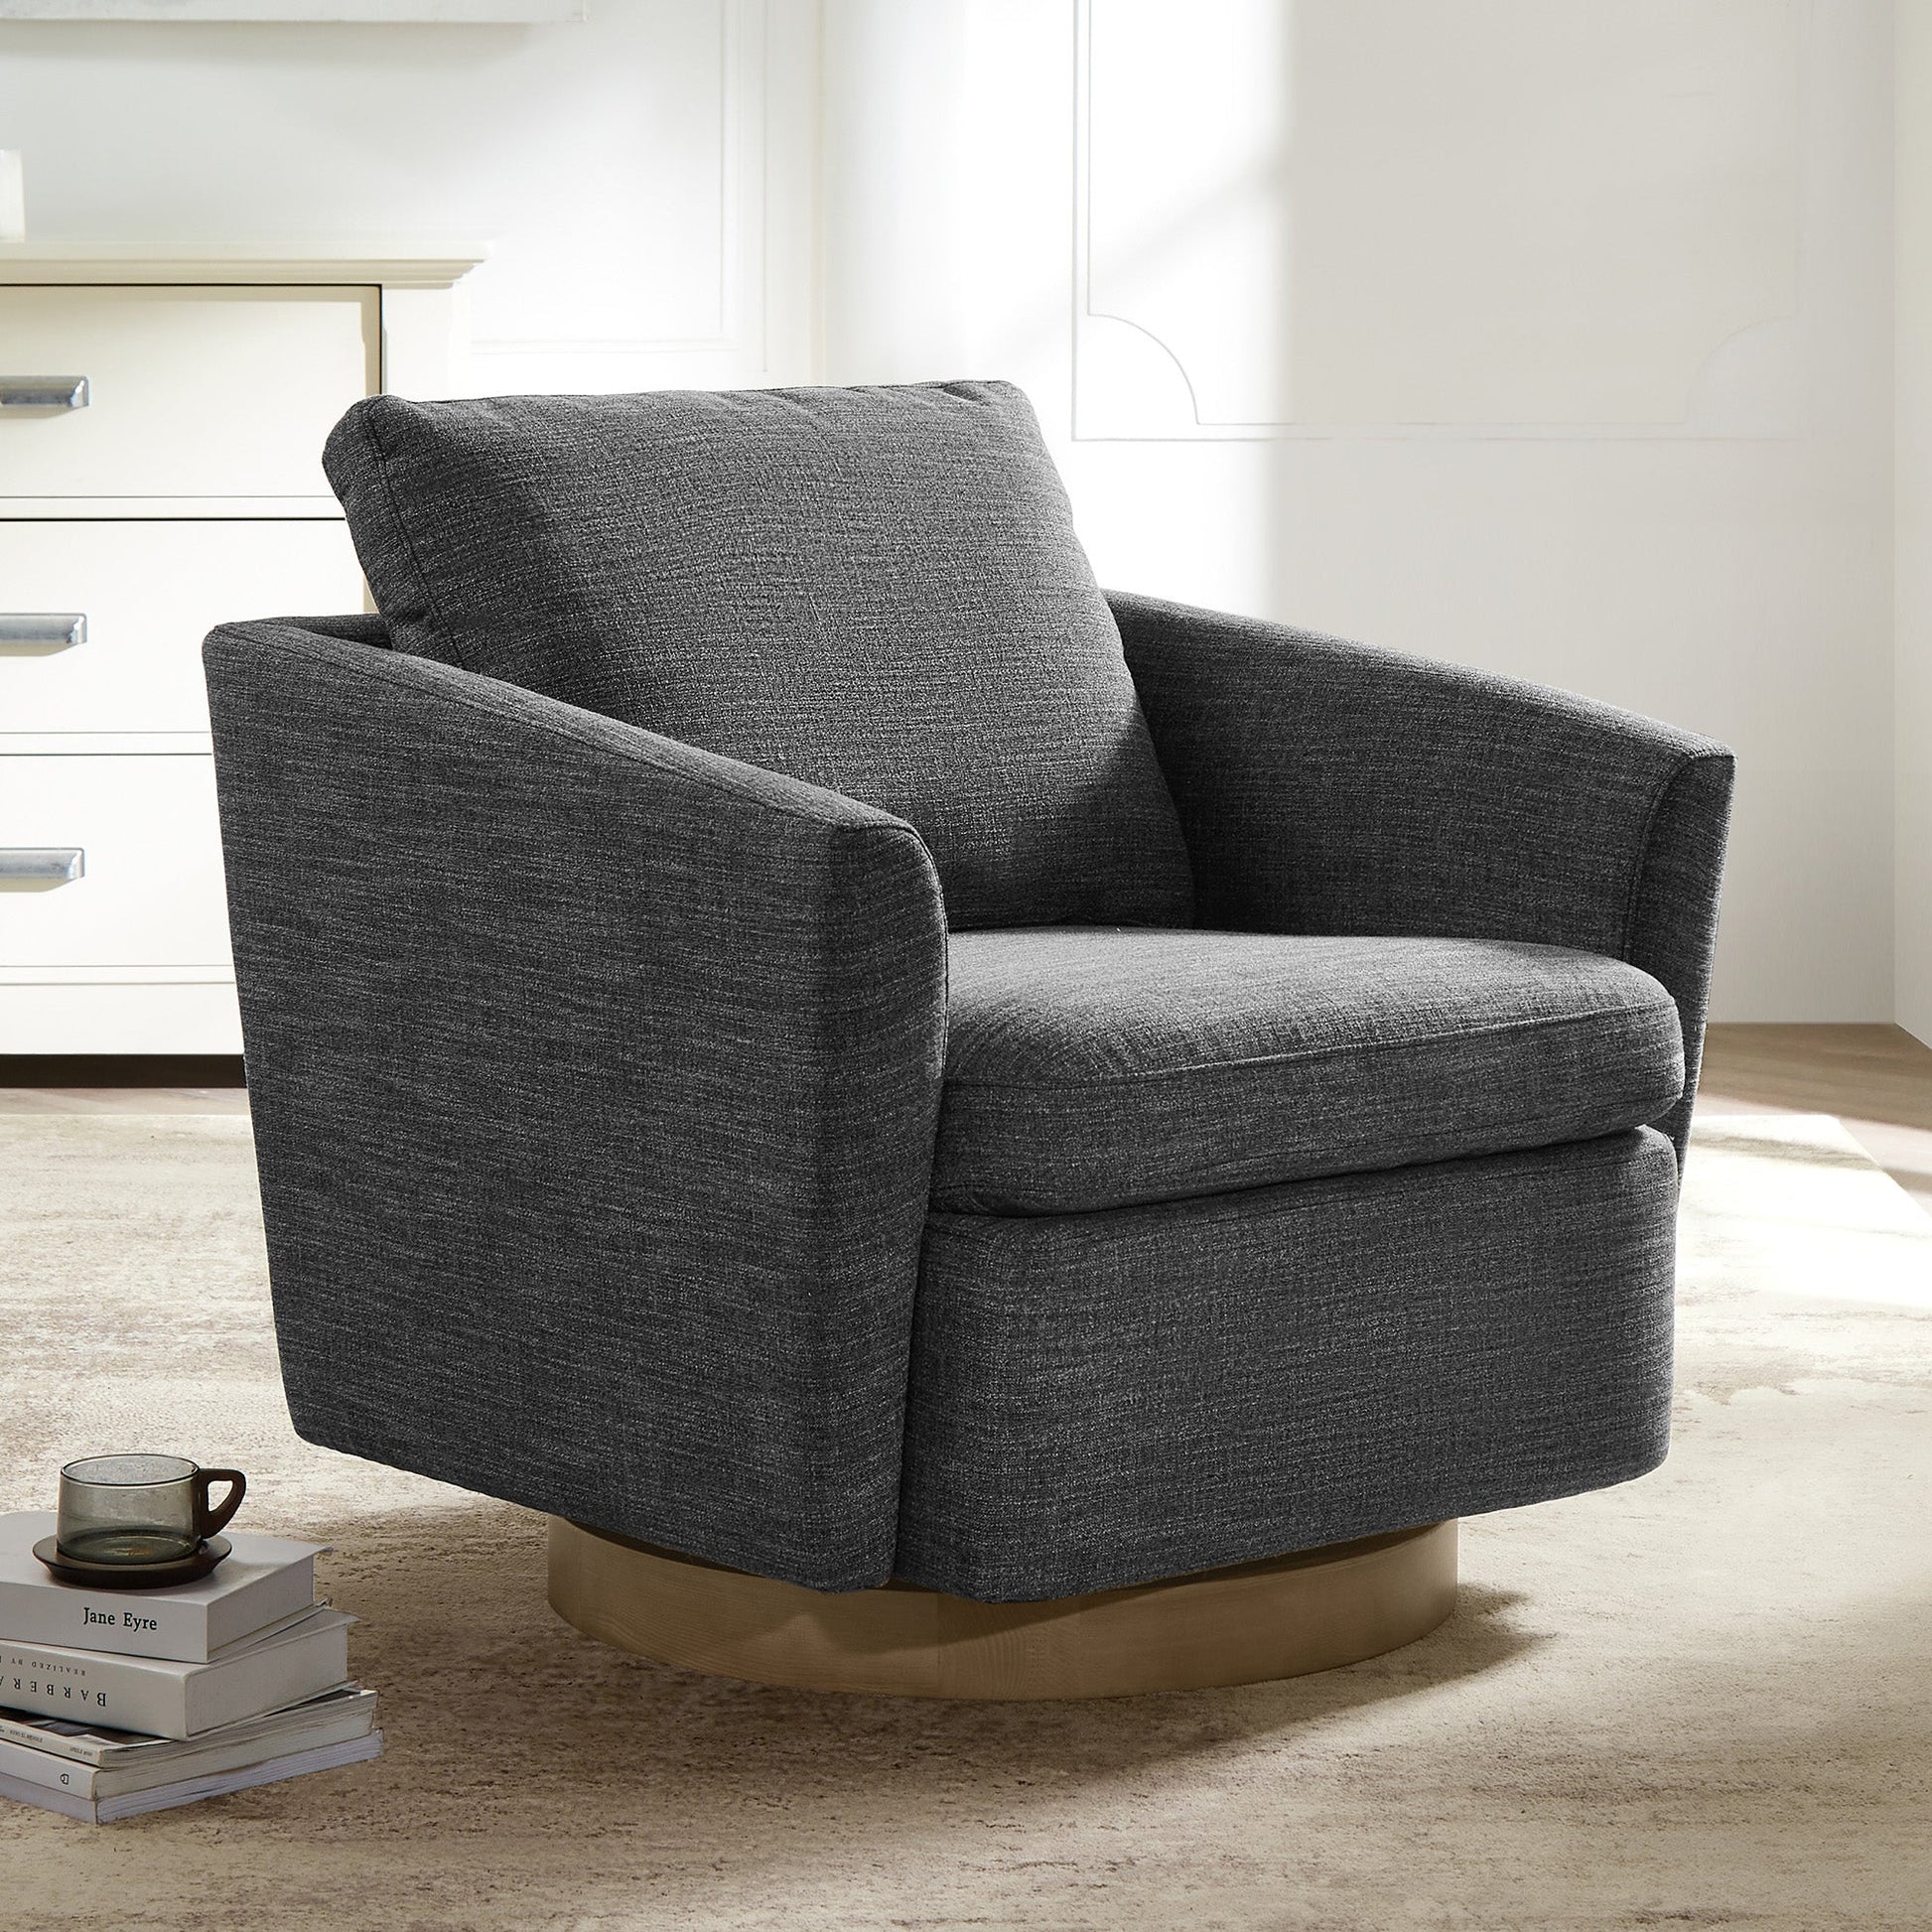 CHITA LIVING-Donella Modern Swivel Accent Chairs-Accent Chair-Fabric-Cream-